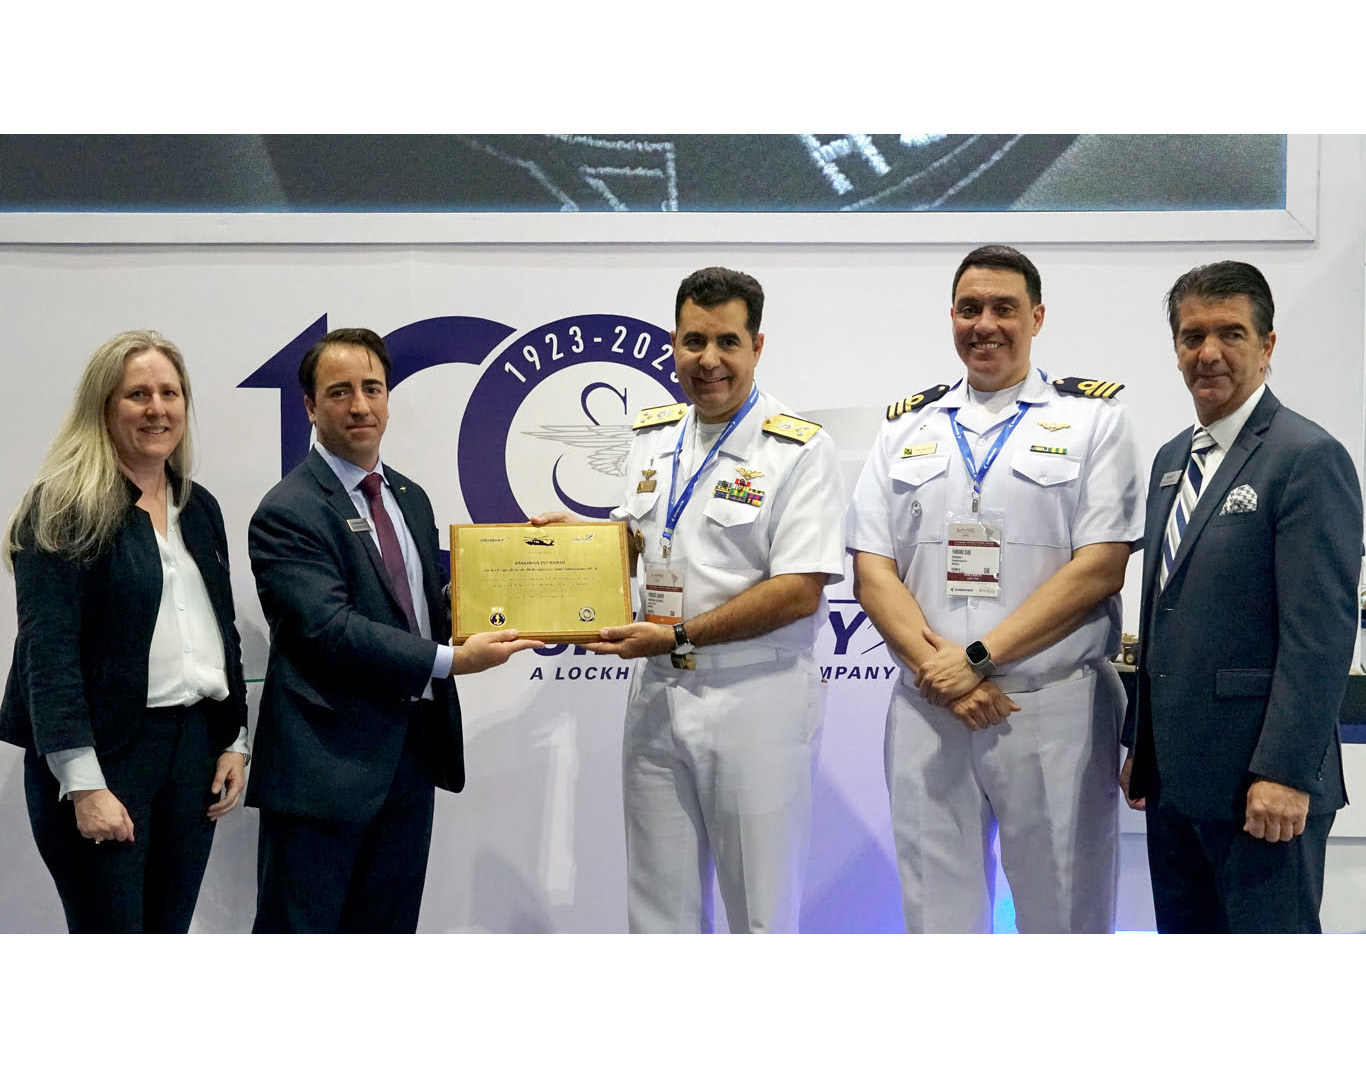 Sikorsky executives Dina Halvorsen, Felipe Benvegnu and Adam Schierholz stand with Brazilian Armed Forces representatives during LAAD 2023, April 12. Sikorsky, a Lockheed Martin company, celebrates its 100th anniversary this year. Lockheed Martin Photo